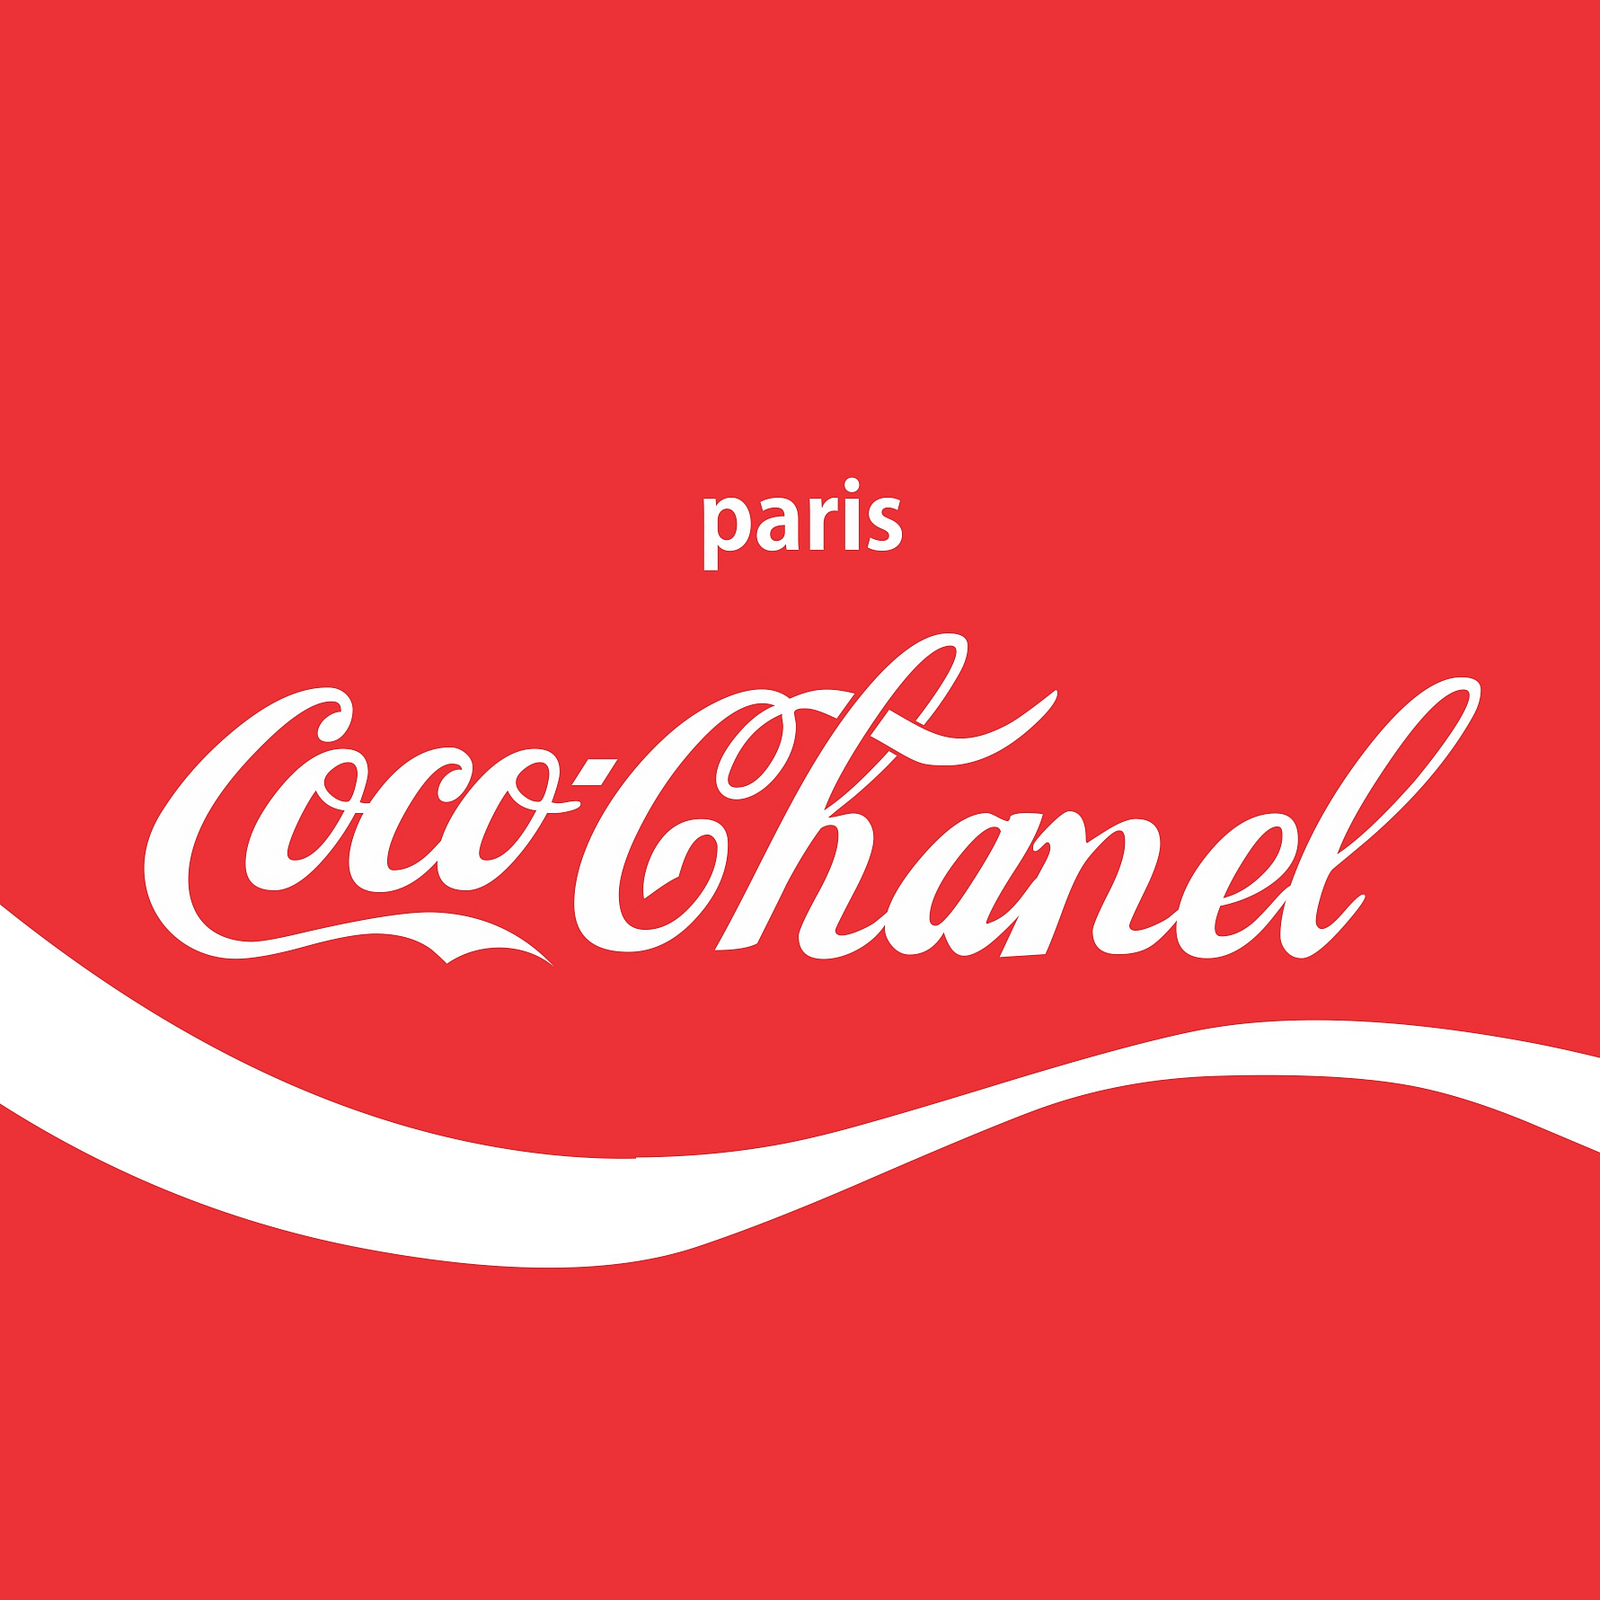 chanel wallpaper tumblr,coca cola,drink,cola,text,red